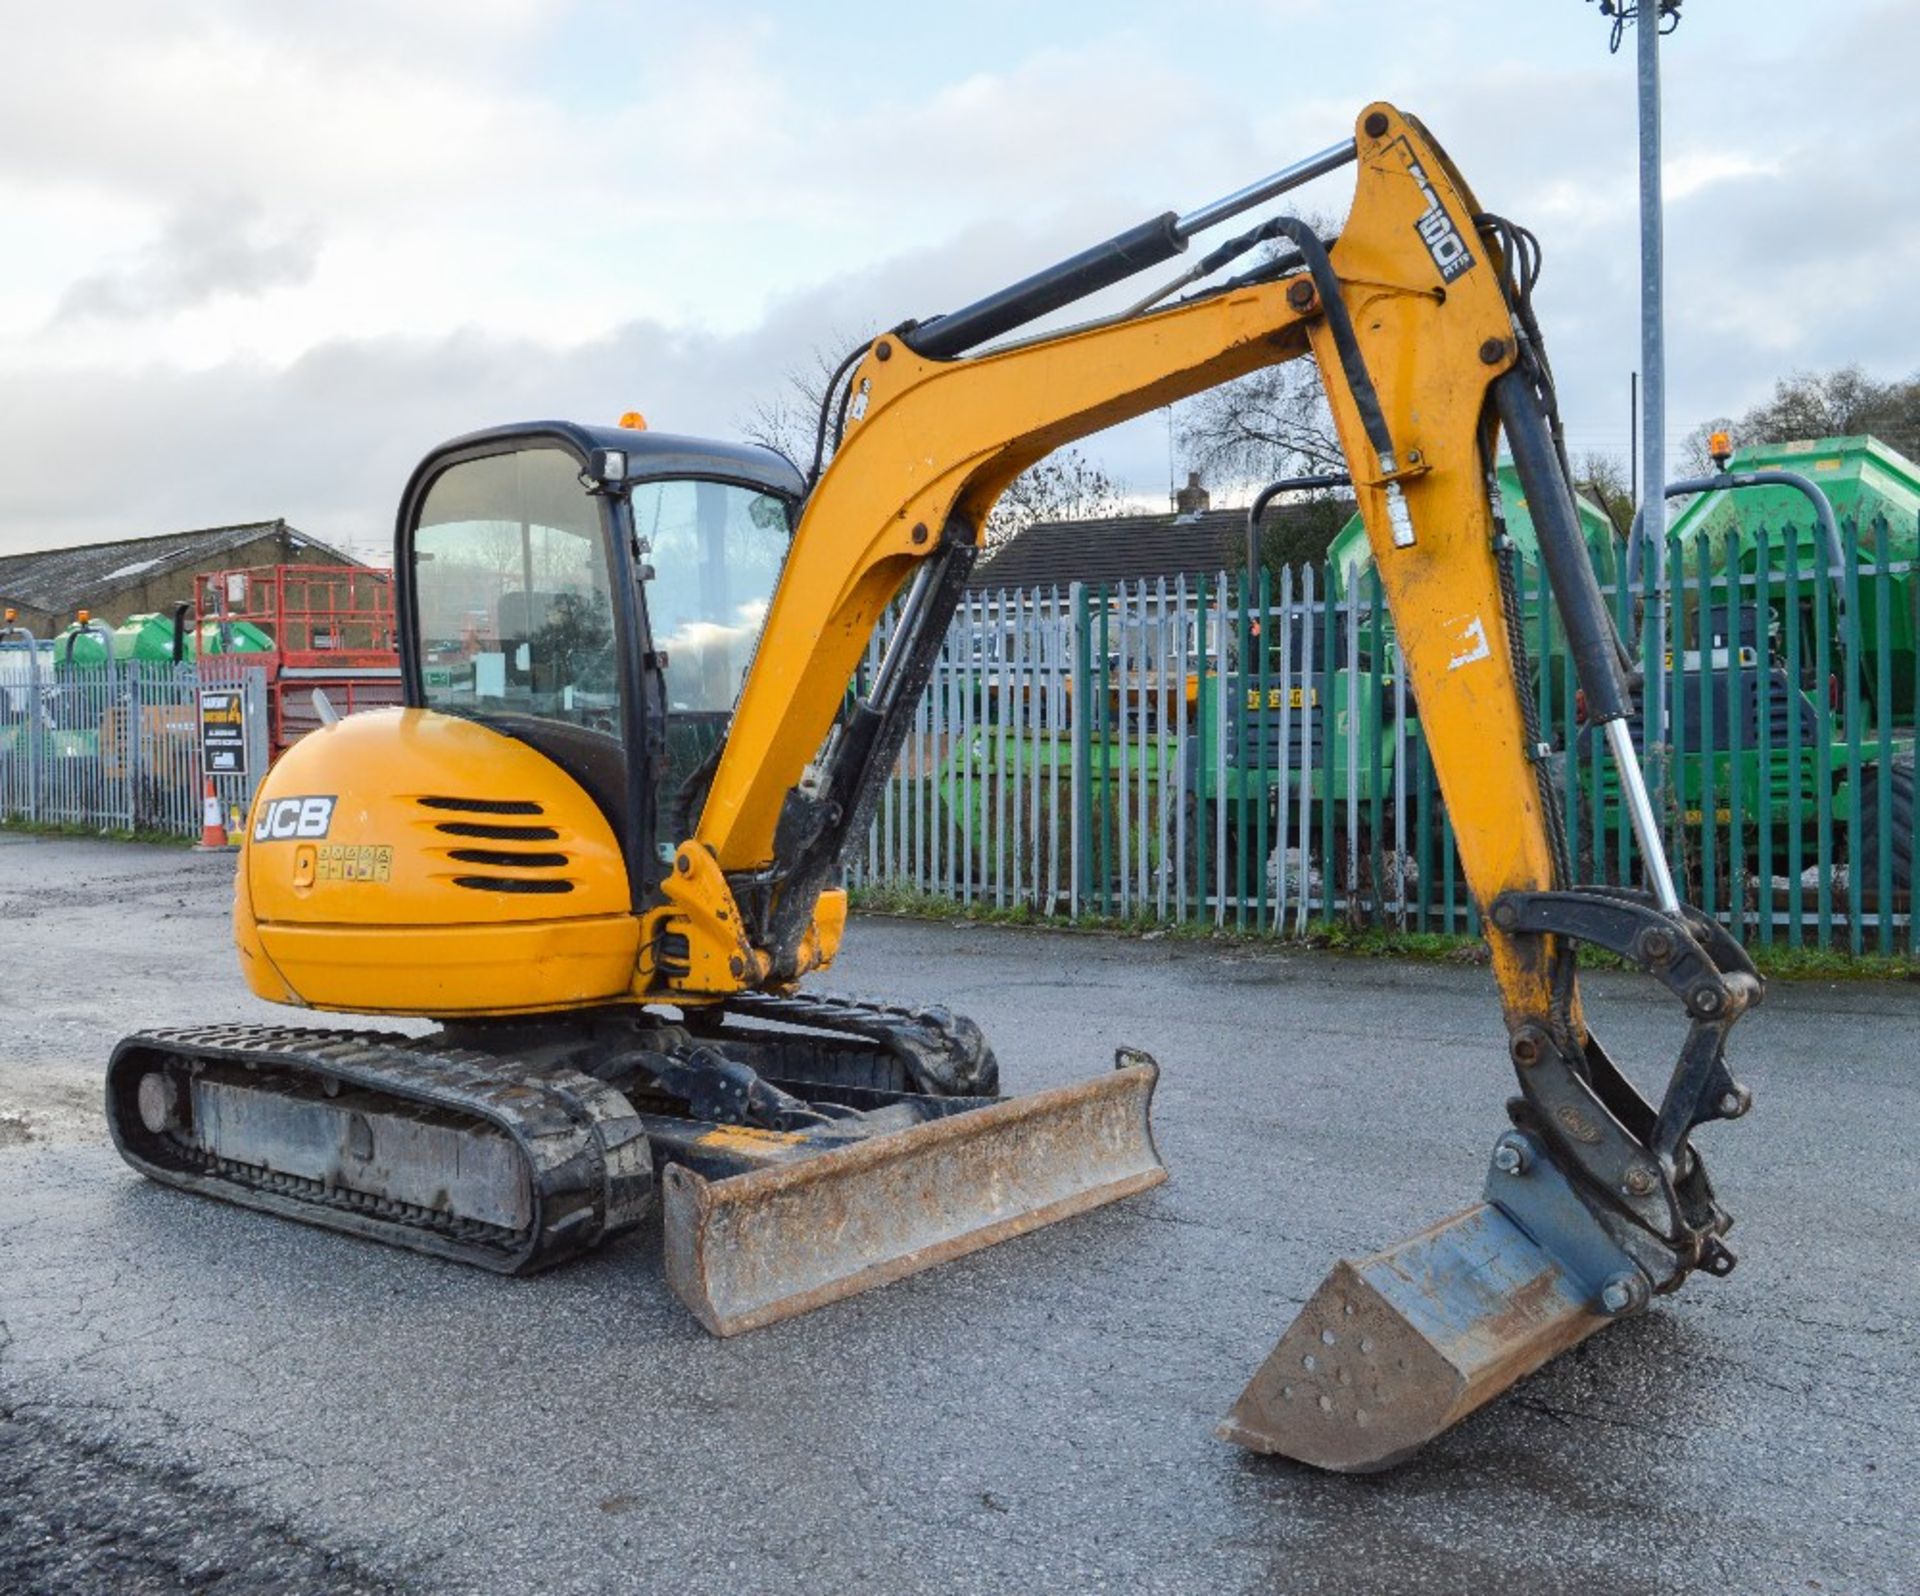 JCB 8050 RTS 5 tonne reduced tail swing rubber tracked mini excavator
Year: 2011
S/N: 1741659 - Image 4 of 12